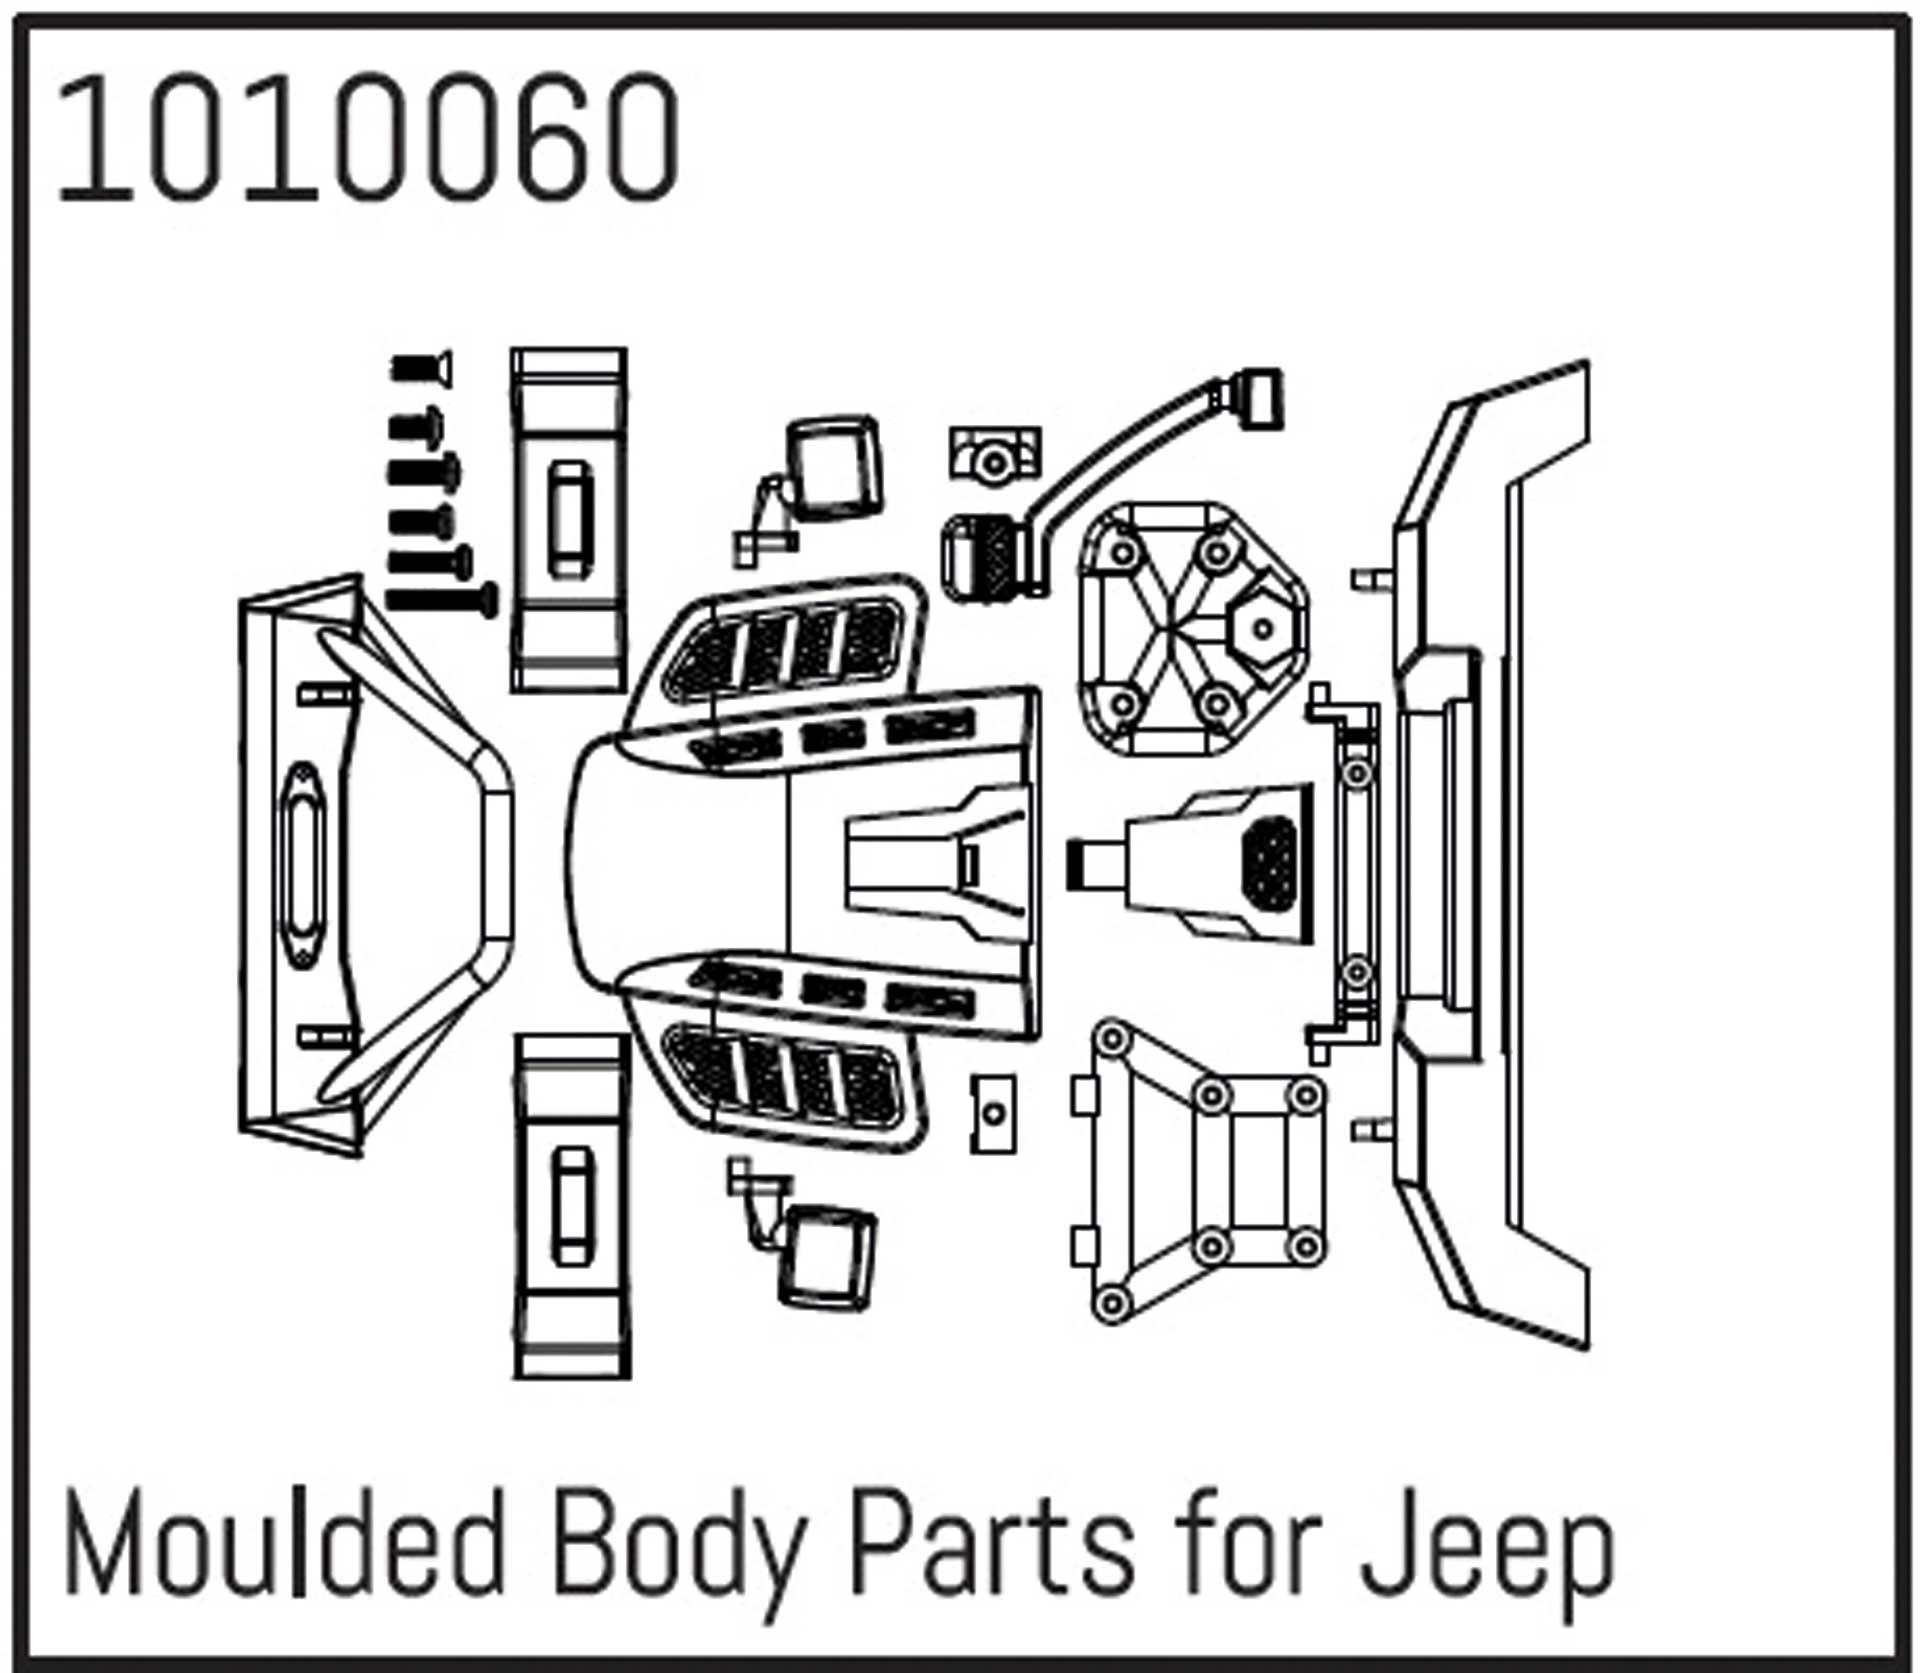 ABSIMA Moulded Body Parts for Wrangler